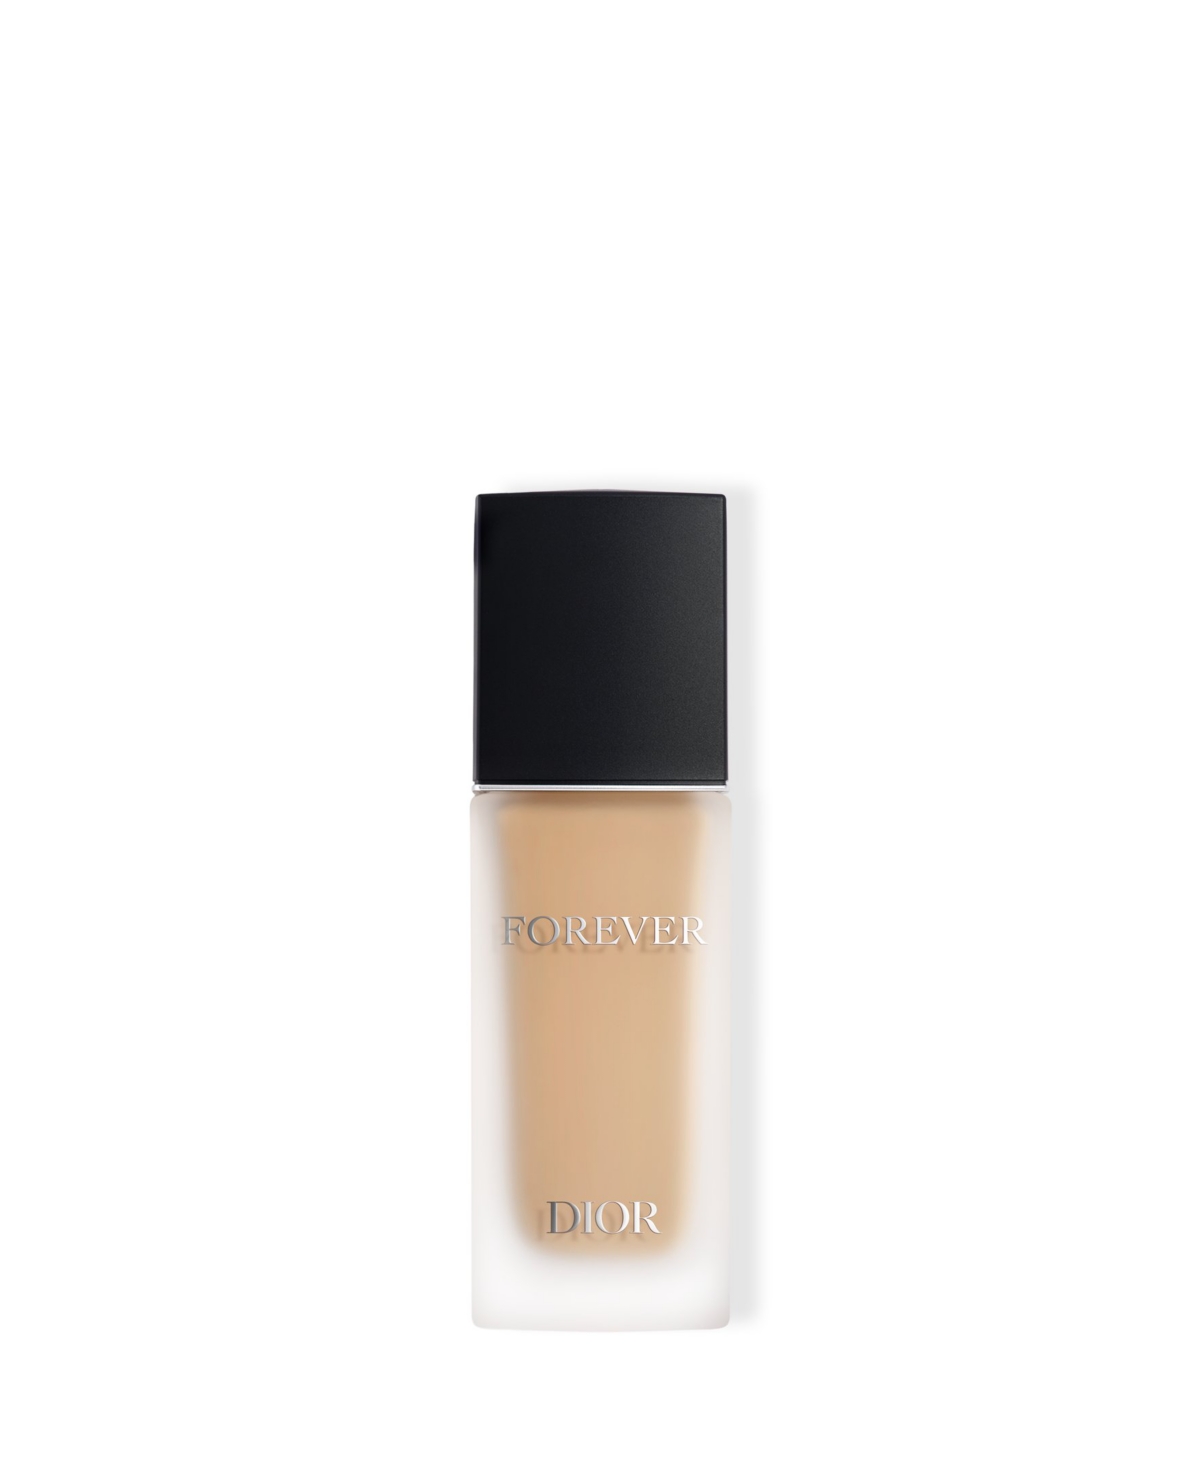 Dior Forever Matte Skincare Foundation Spf 15 In . Warm (light Skin With Warm Tones)